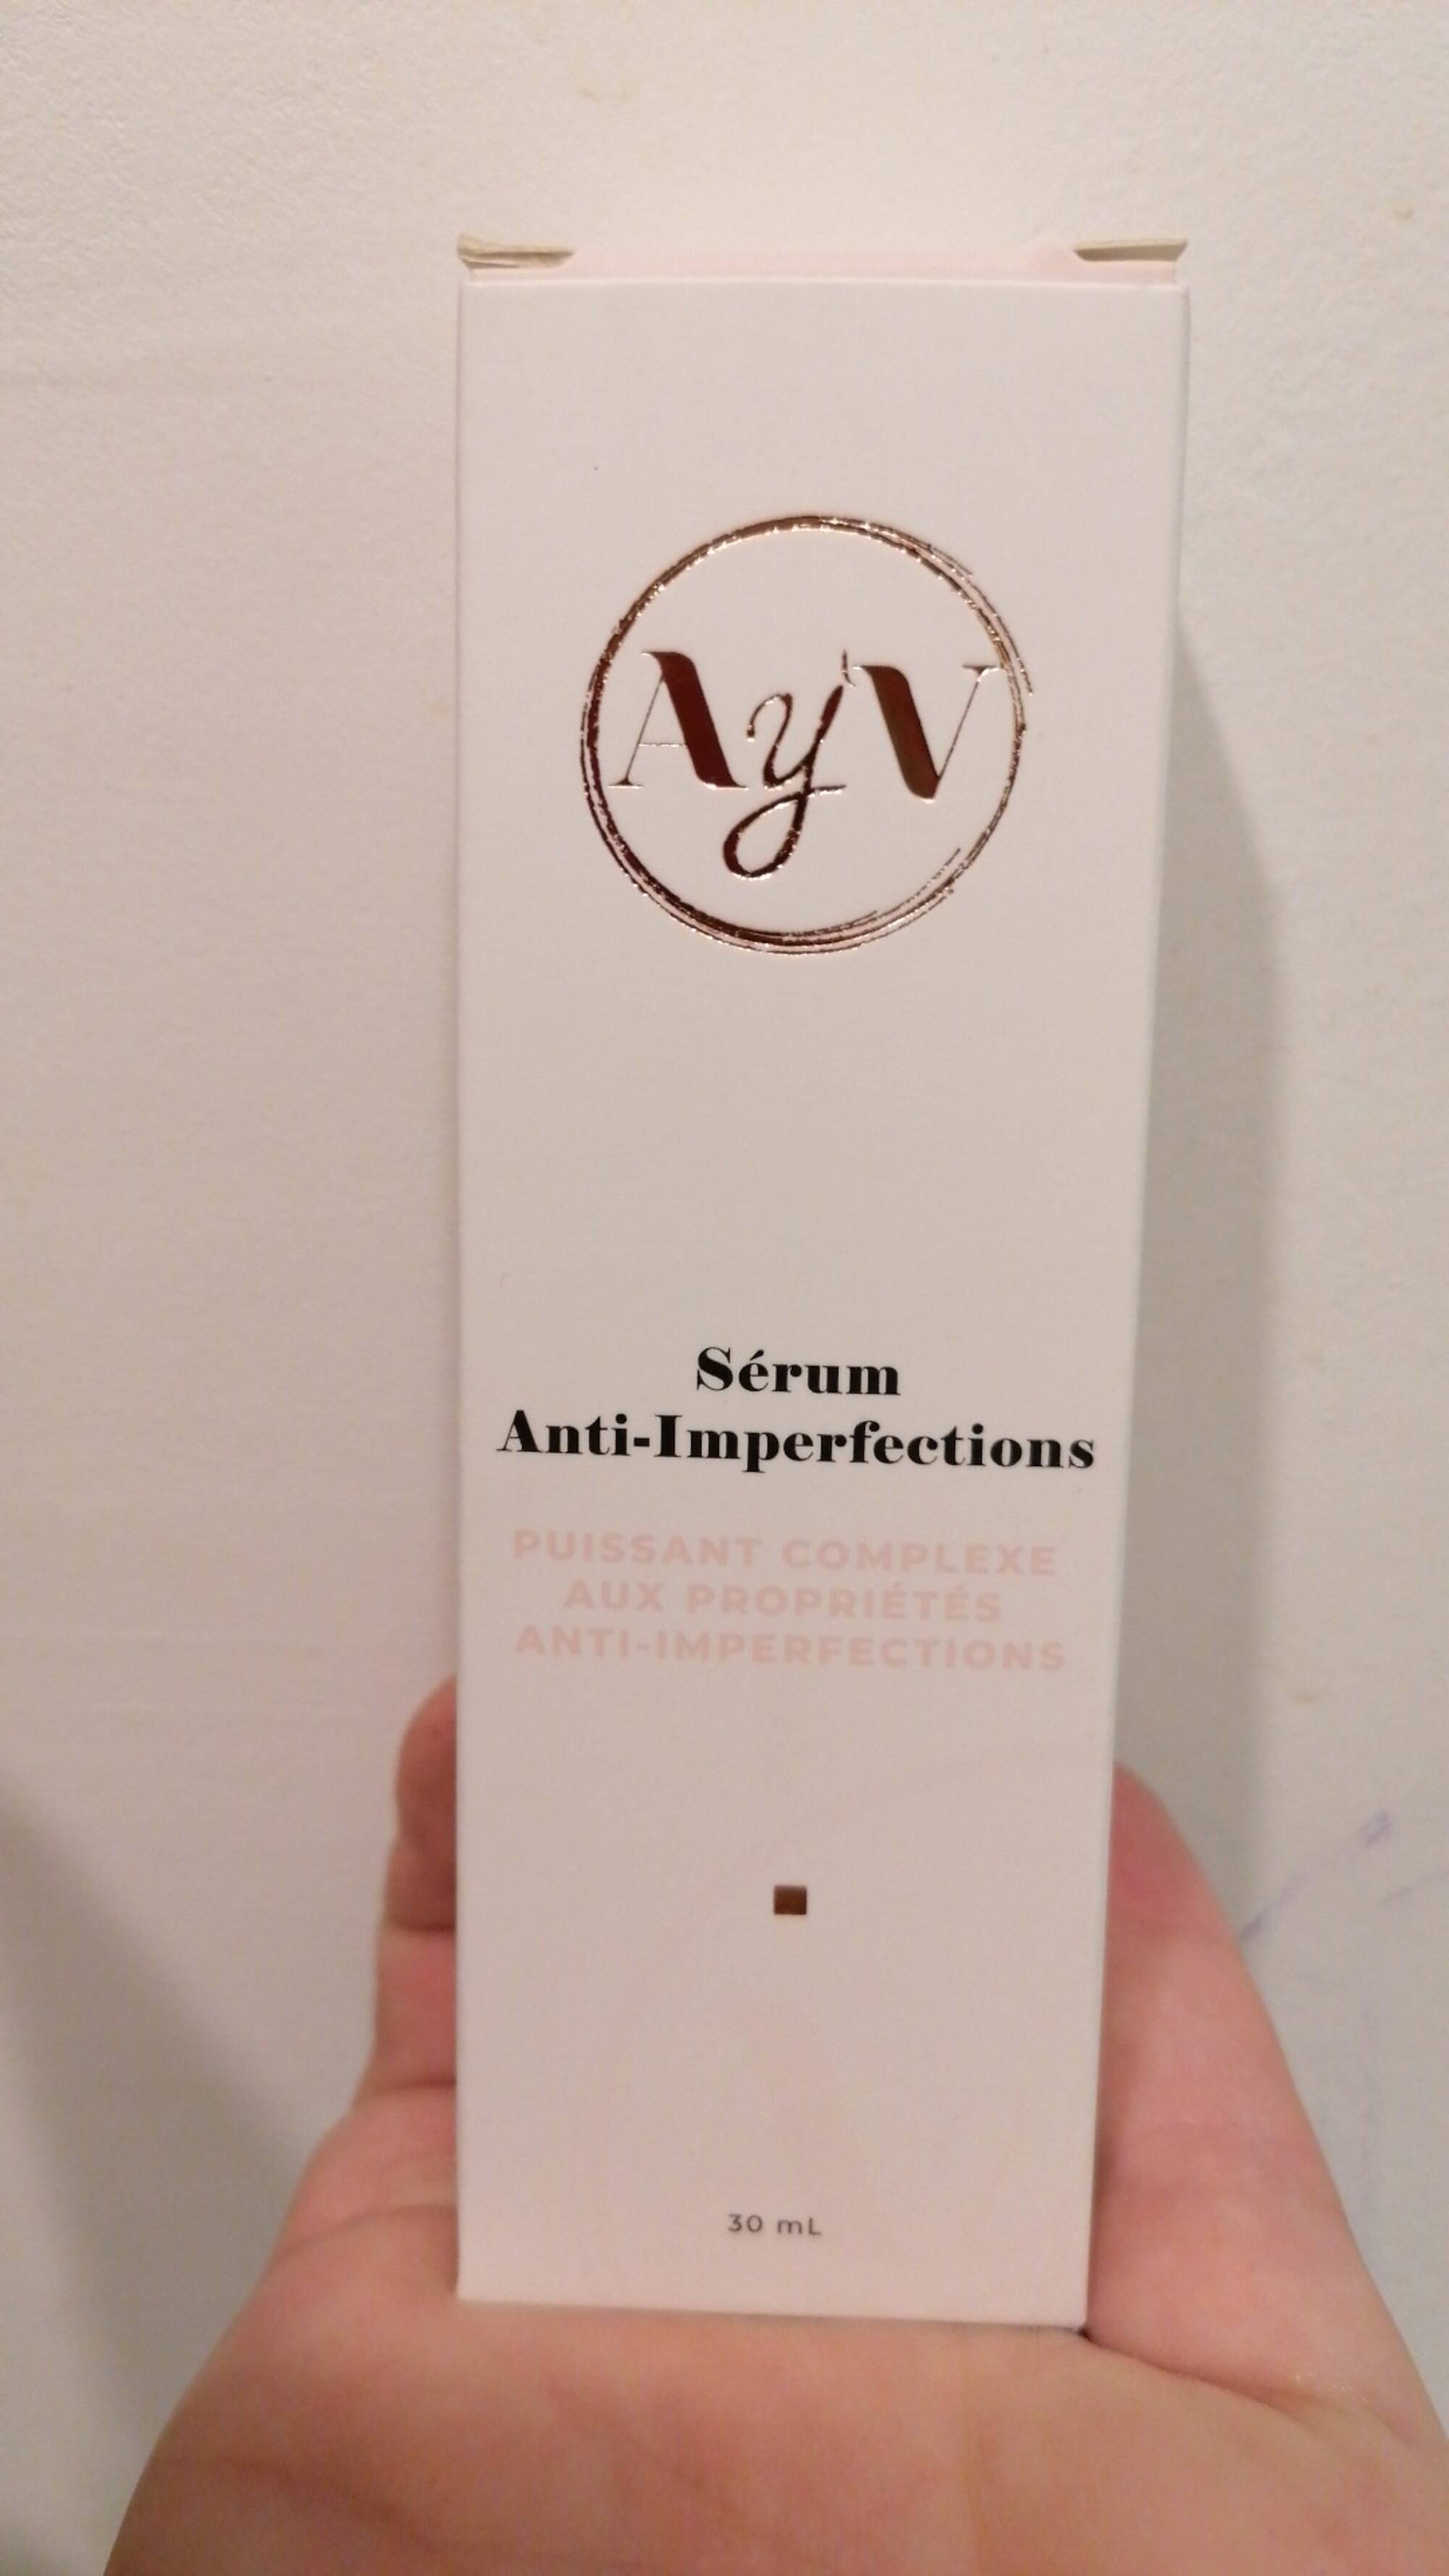 AY'V - Sérum anti-imperfections